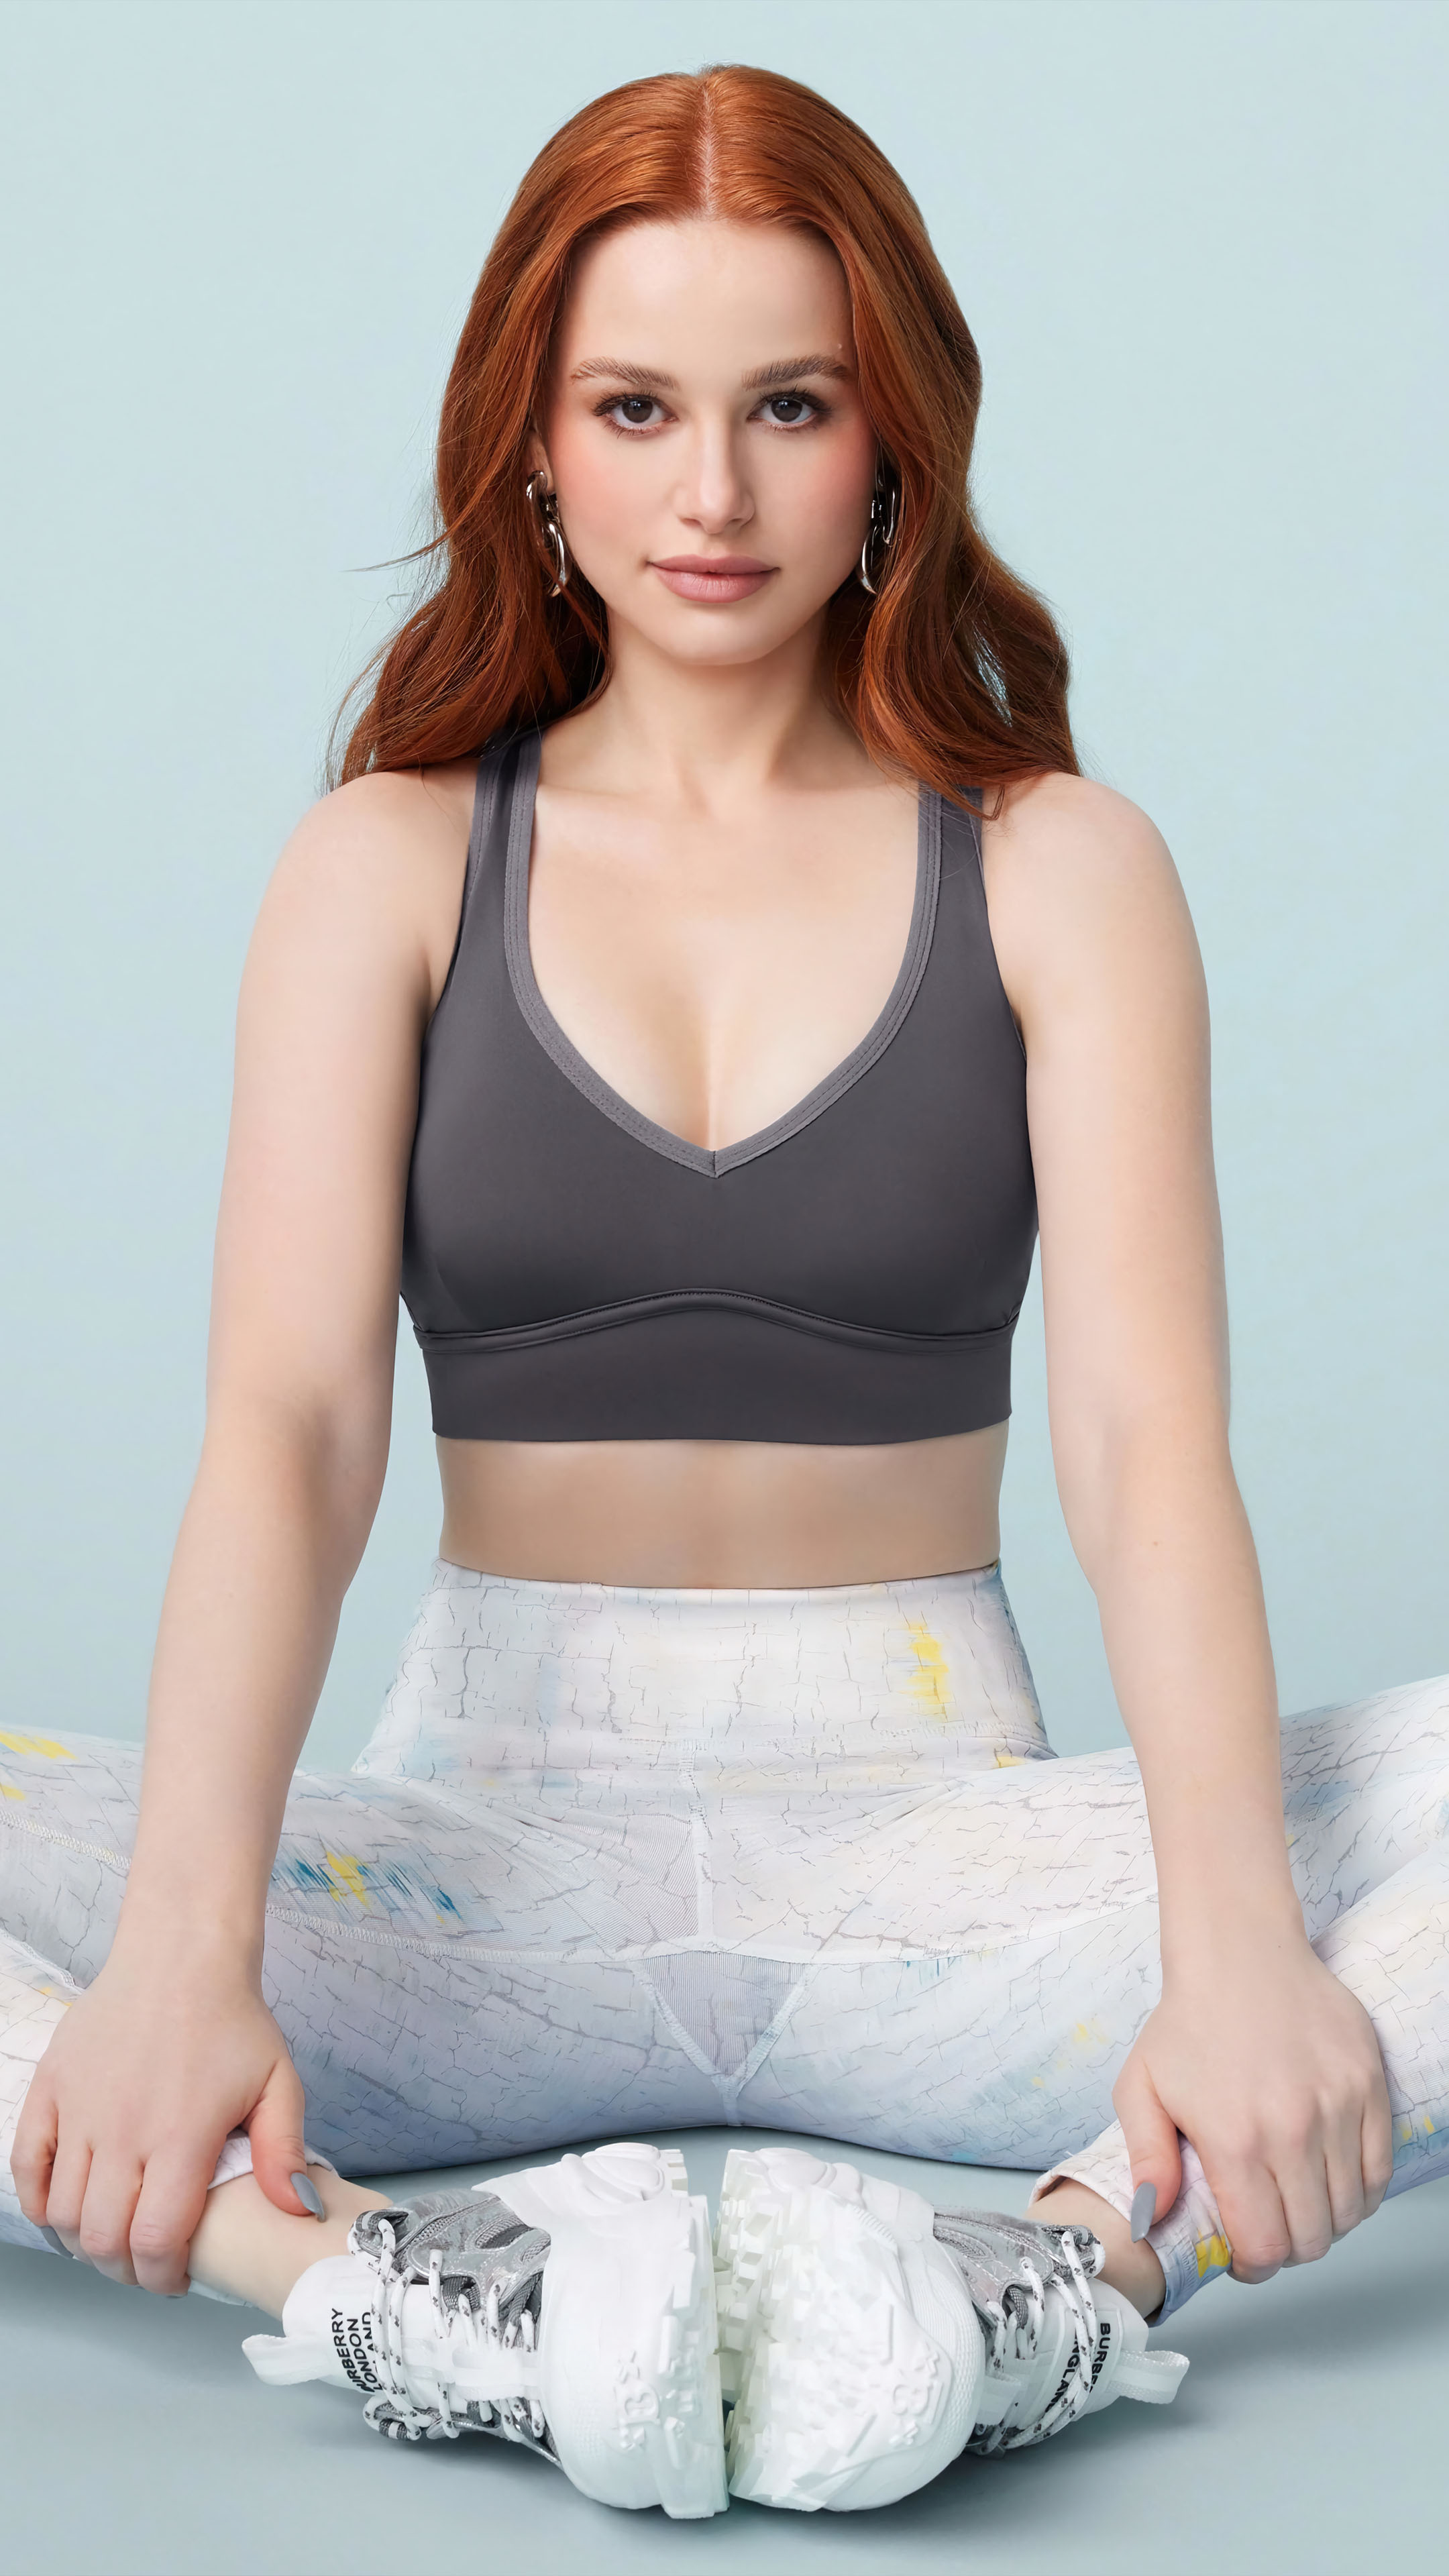 Madelaine Petsch In Gym Suit 4K Ultra HD Mobile Wallpaper